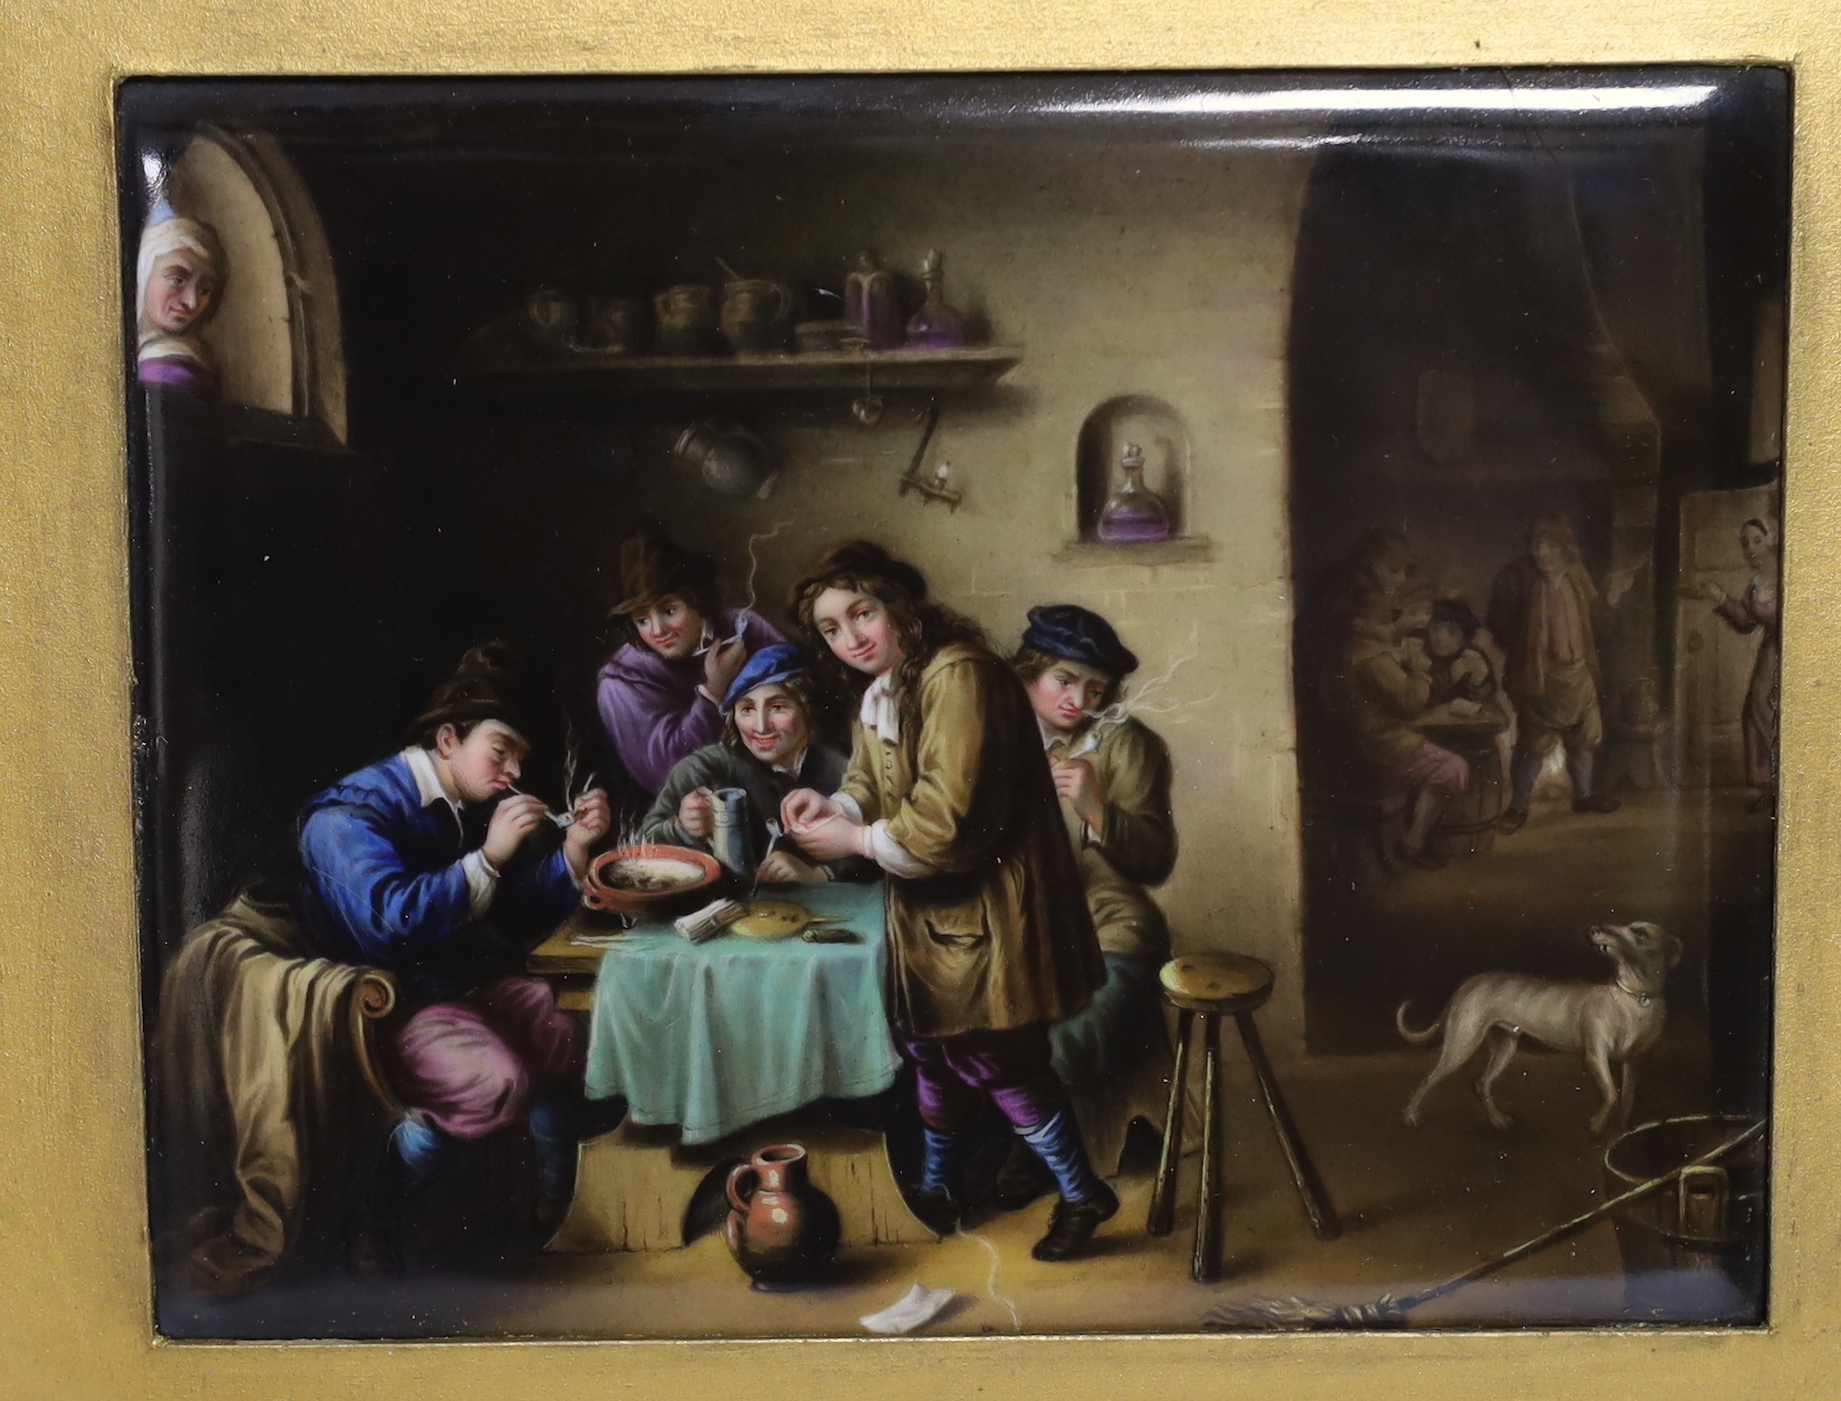 A Late 19th century porcelain plaque, painted with a tavern scene with figures, after Teniers, ornate gilt framed, 18 x 14cm